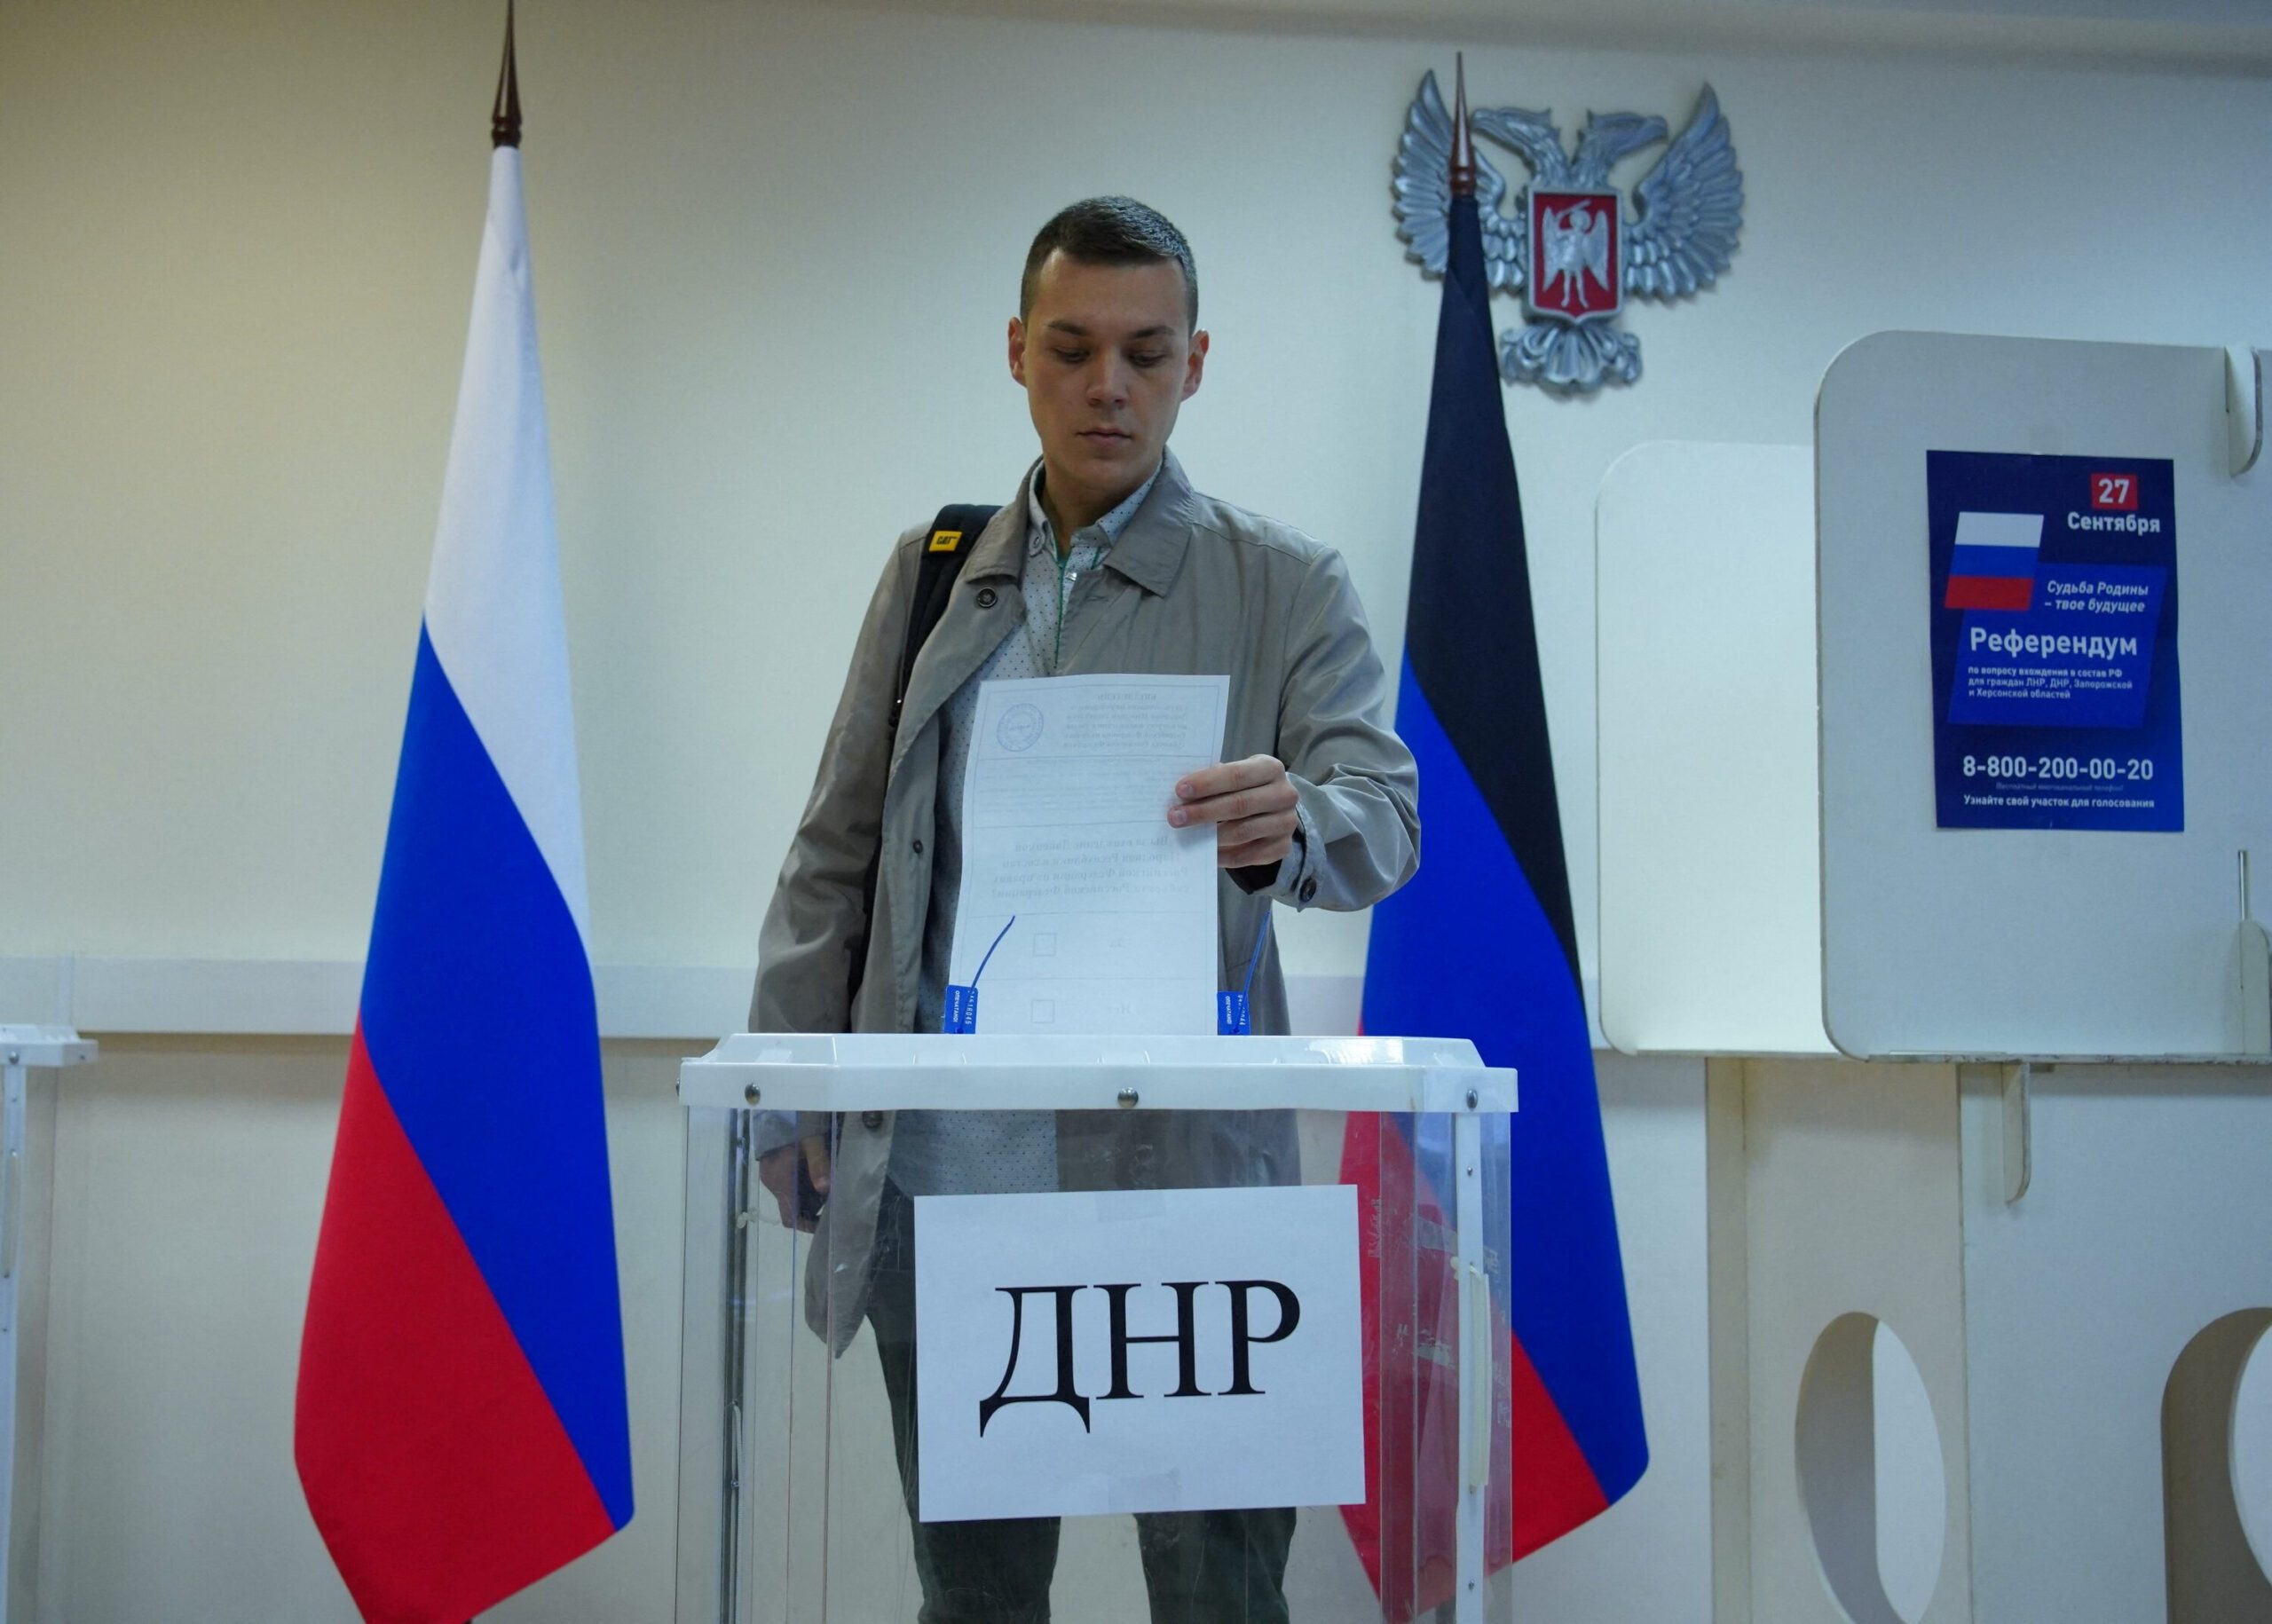 Russia holds votes in occupied parts of Ukraine; Kyiv says residents coerced